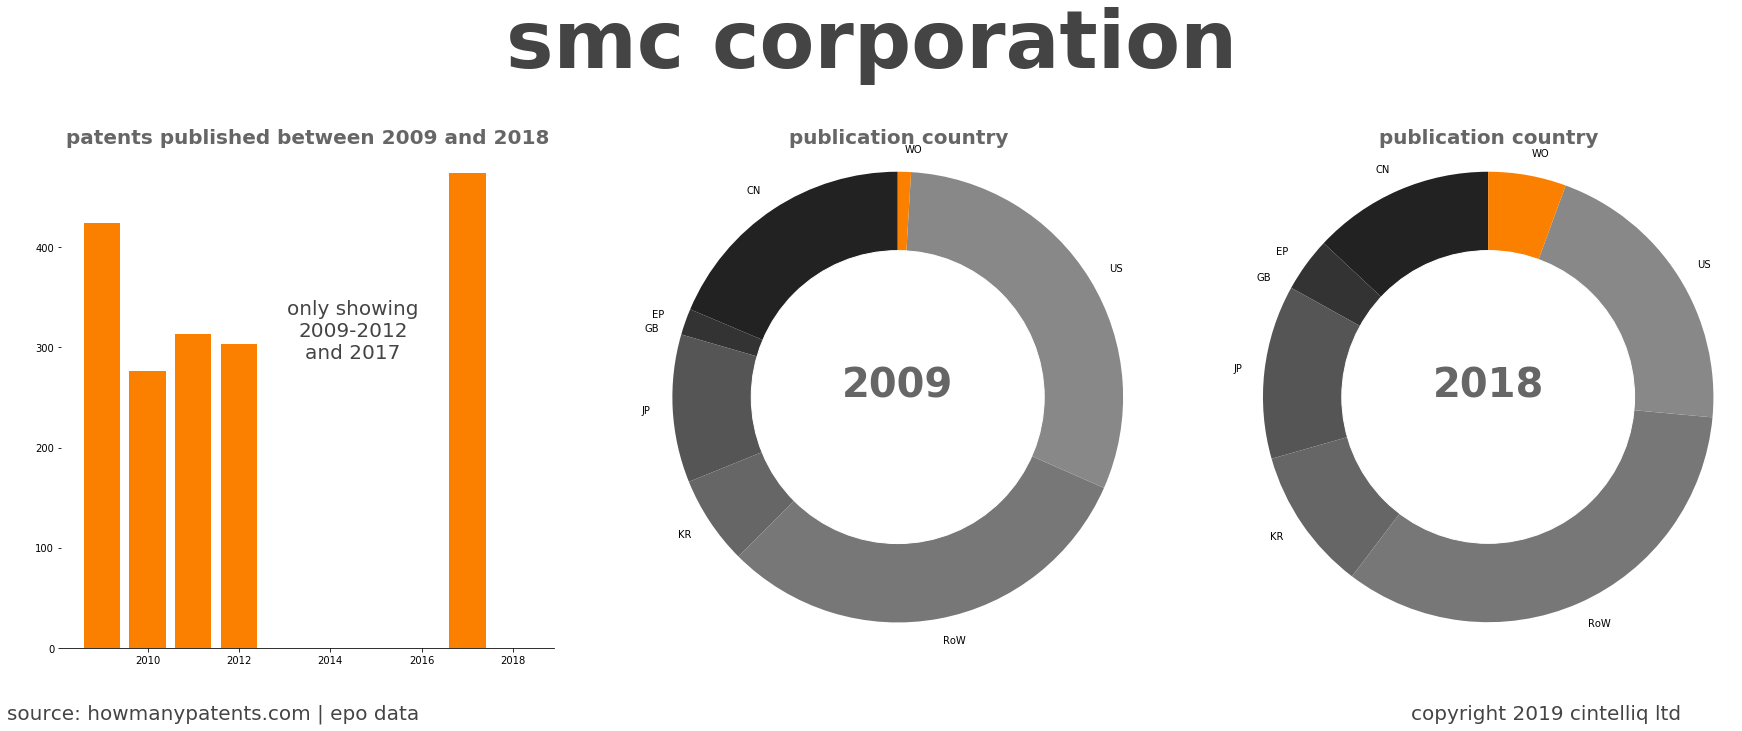 summary of patents for Smc Corporation